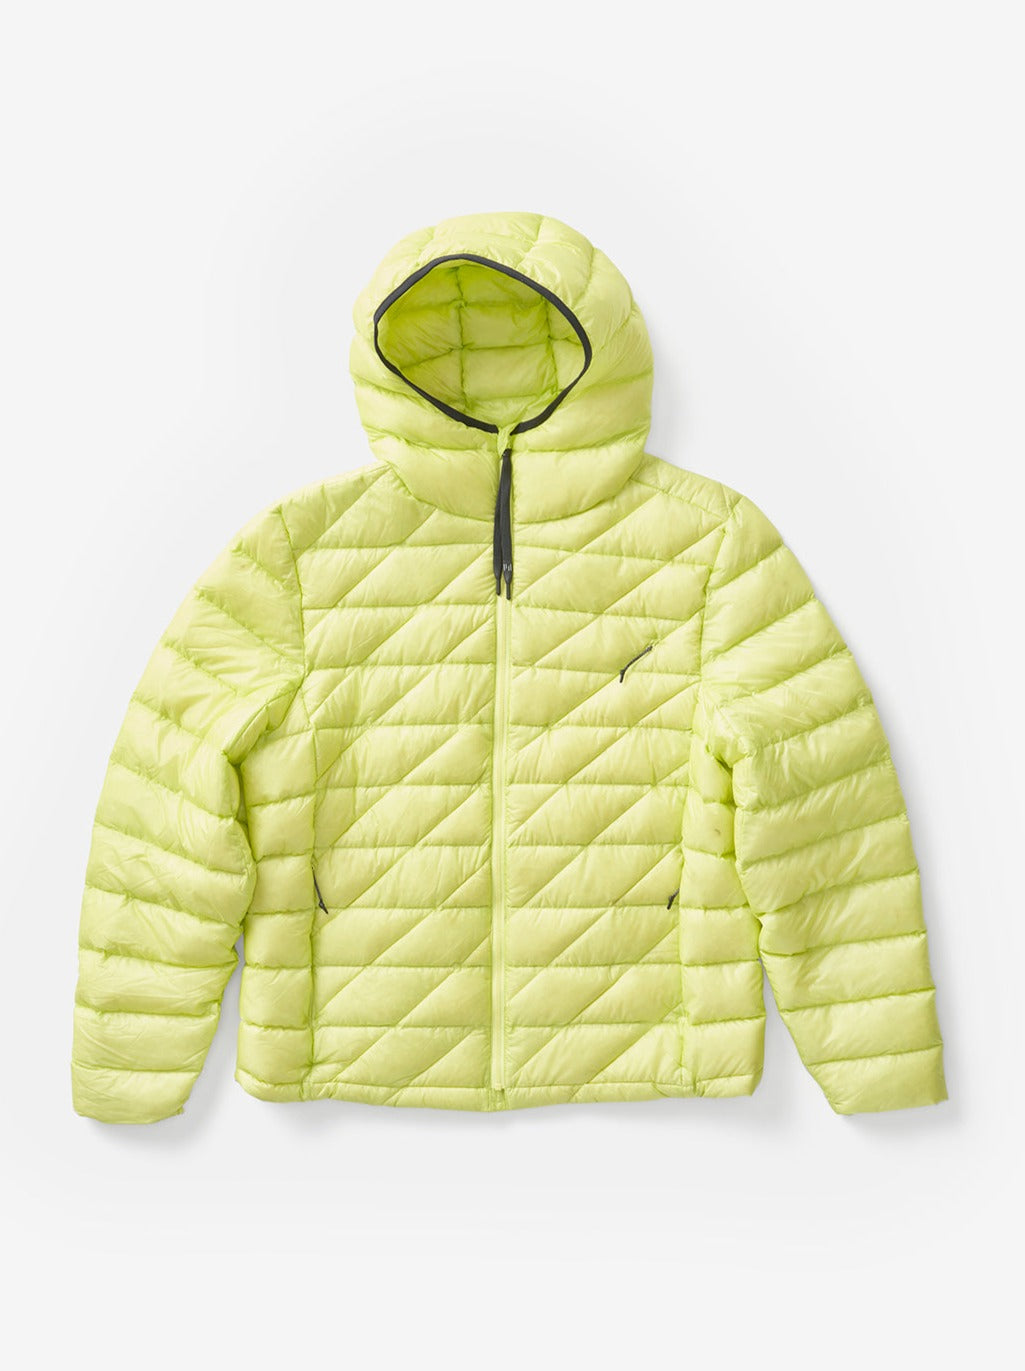 Man PACKABLE DOWN JACKET - Mineral Yellow - flat lay